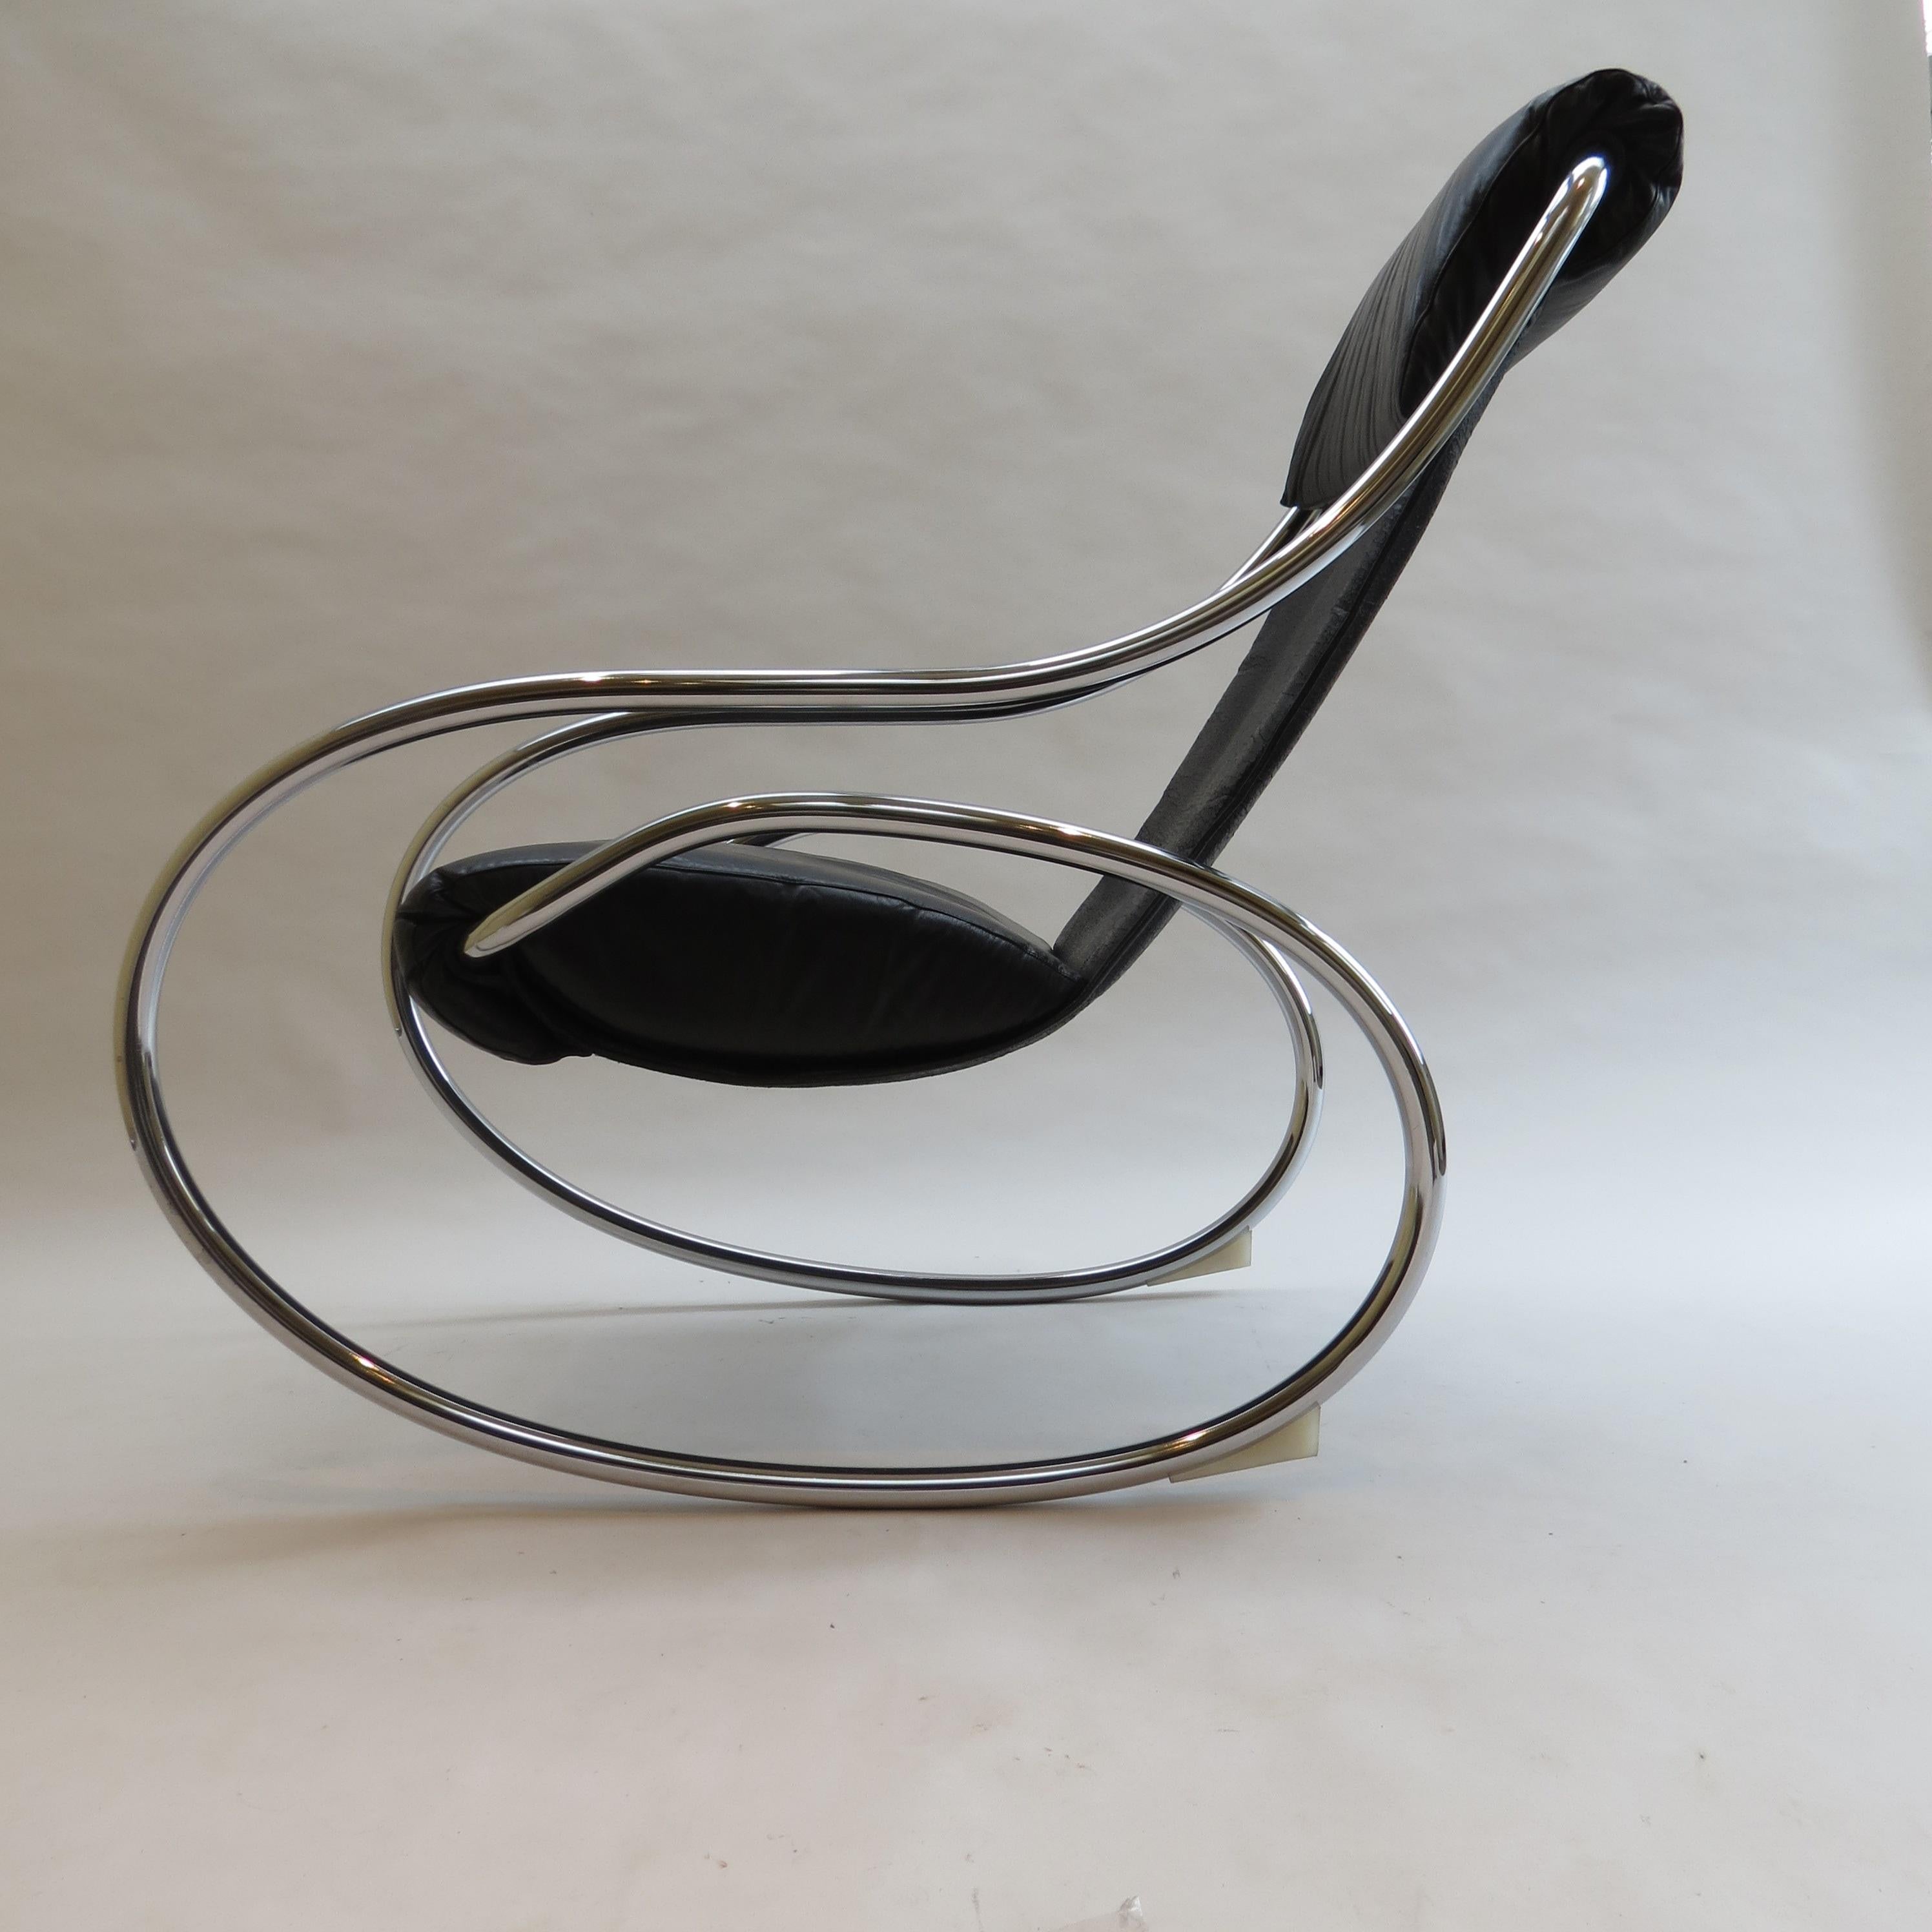 1970s rocking chair with a sculptural chrome tube frame and leather slung seat.  It was originally retailed through Heals, London.

The chair is good vintage condition, there is some distressing to the leather through normal wear and tear.  The